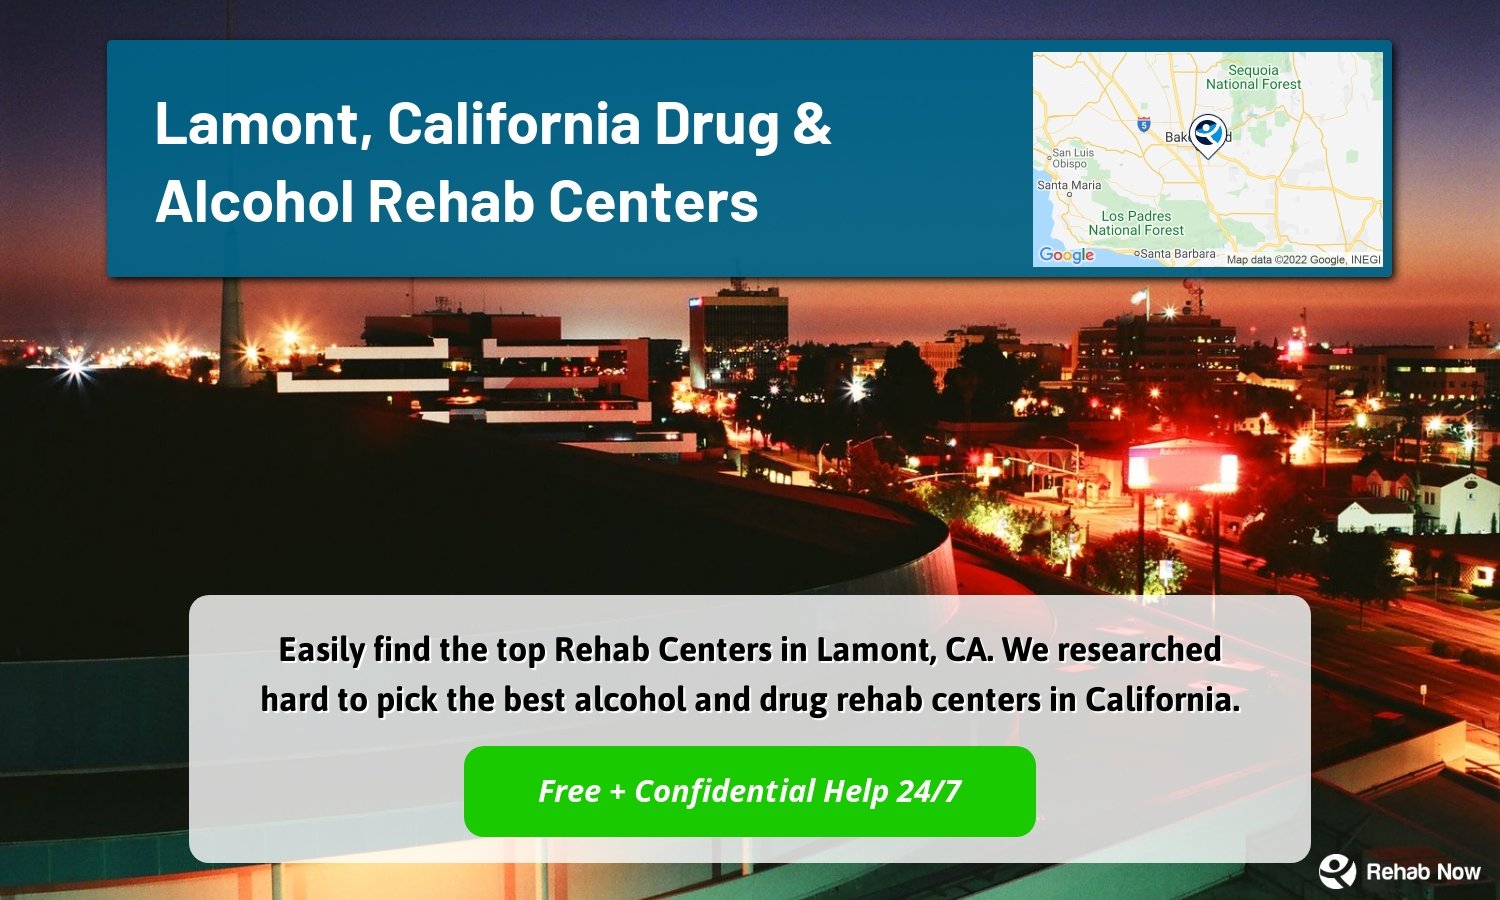 Easily find the top Rehab Centers in Lamont, CA. We researched hard to pick the best alcohol and drug rehab centers in California.